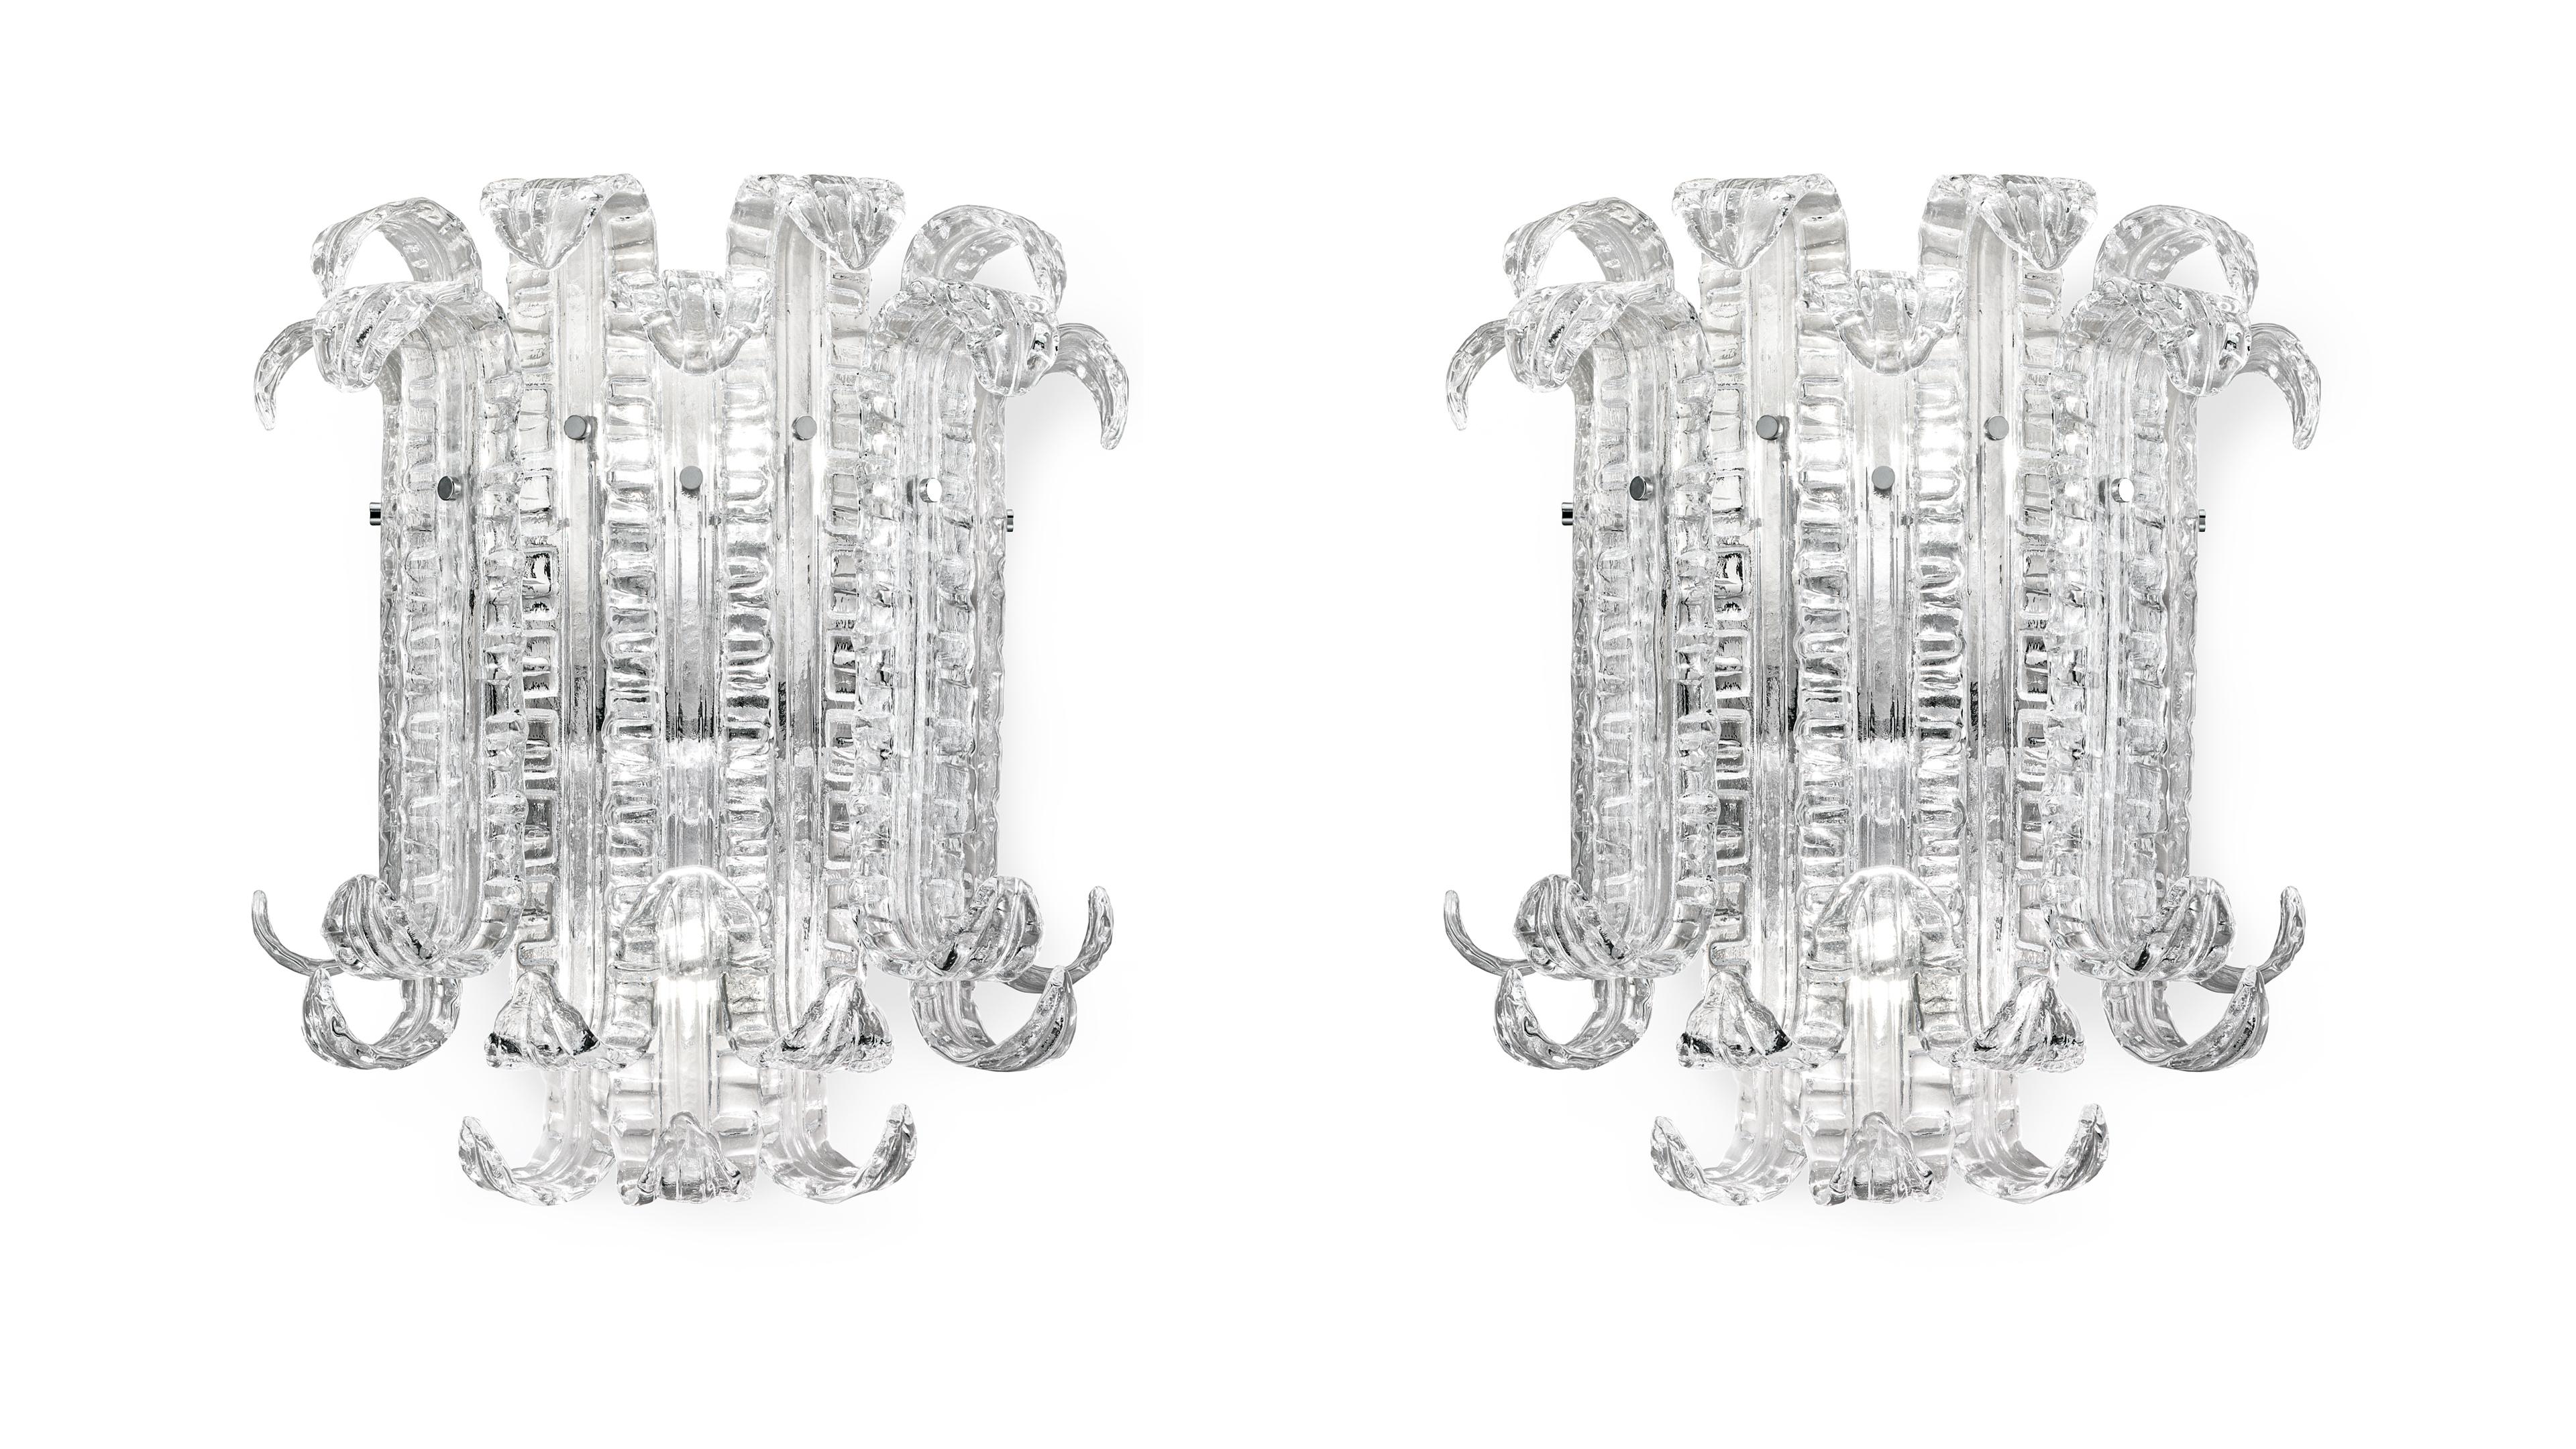 Polished New Felci 7239 Wall Scone in Crystal Glass, by Barovier&Toso